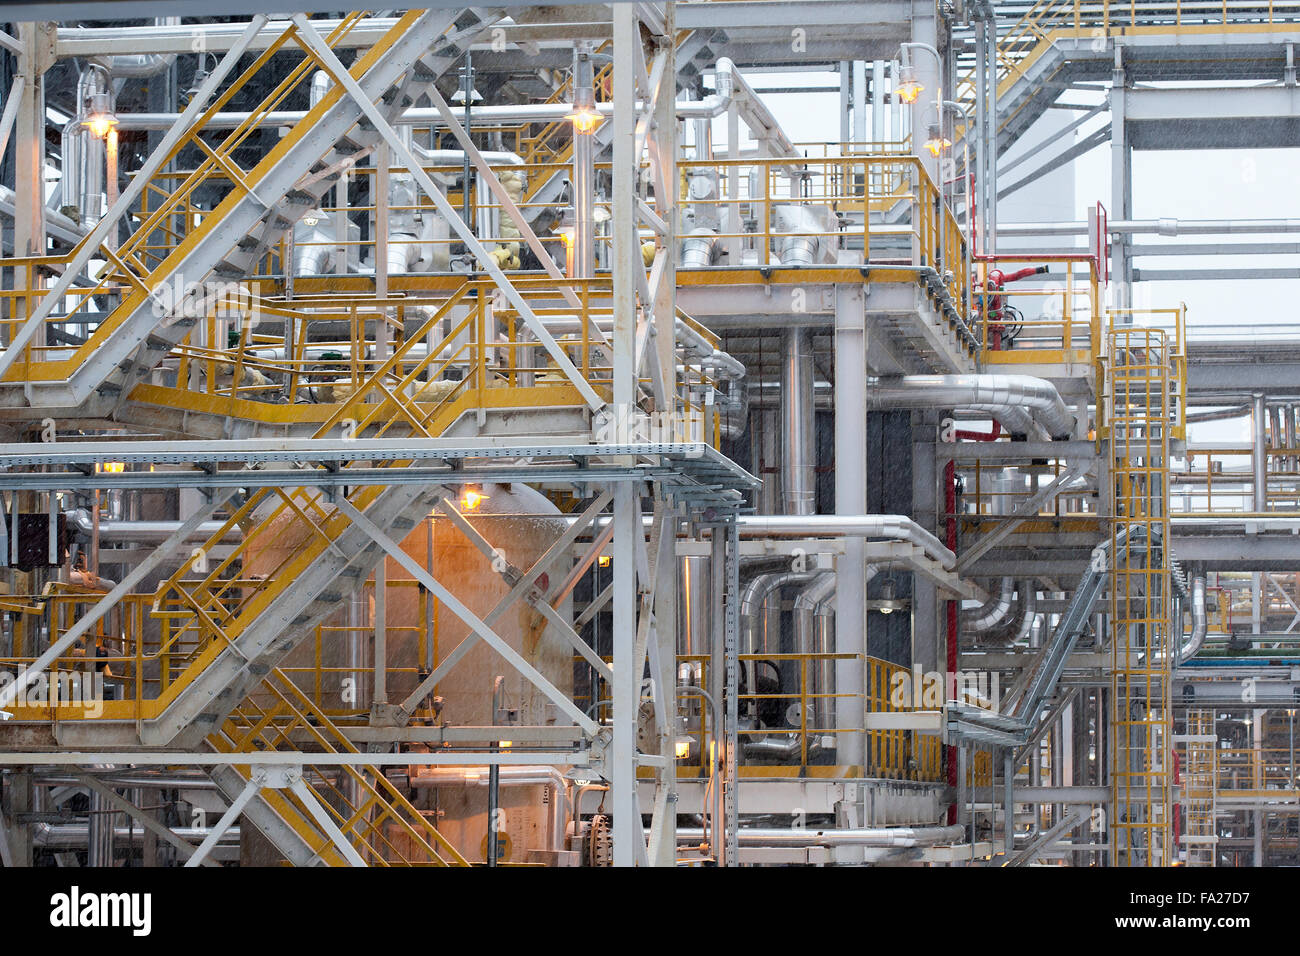 industrial construction. fuel production petrochemical plant, refining Stock Photo